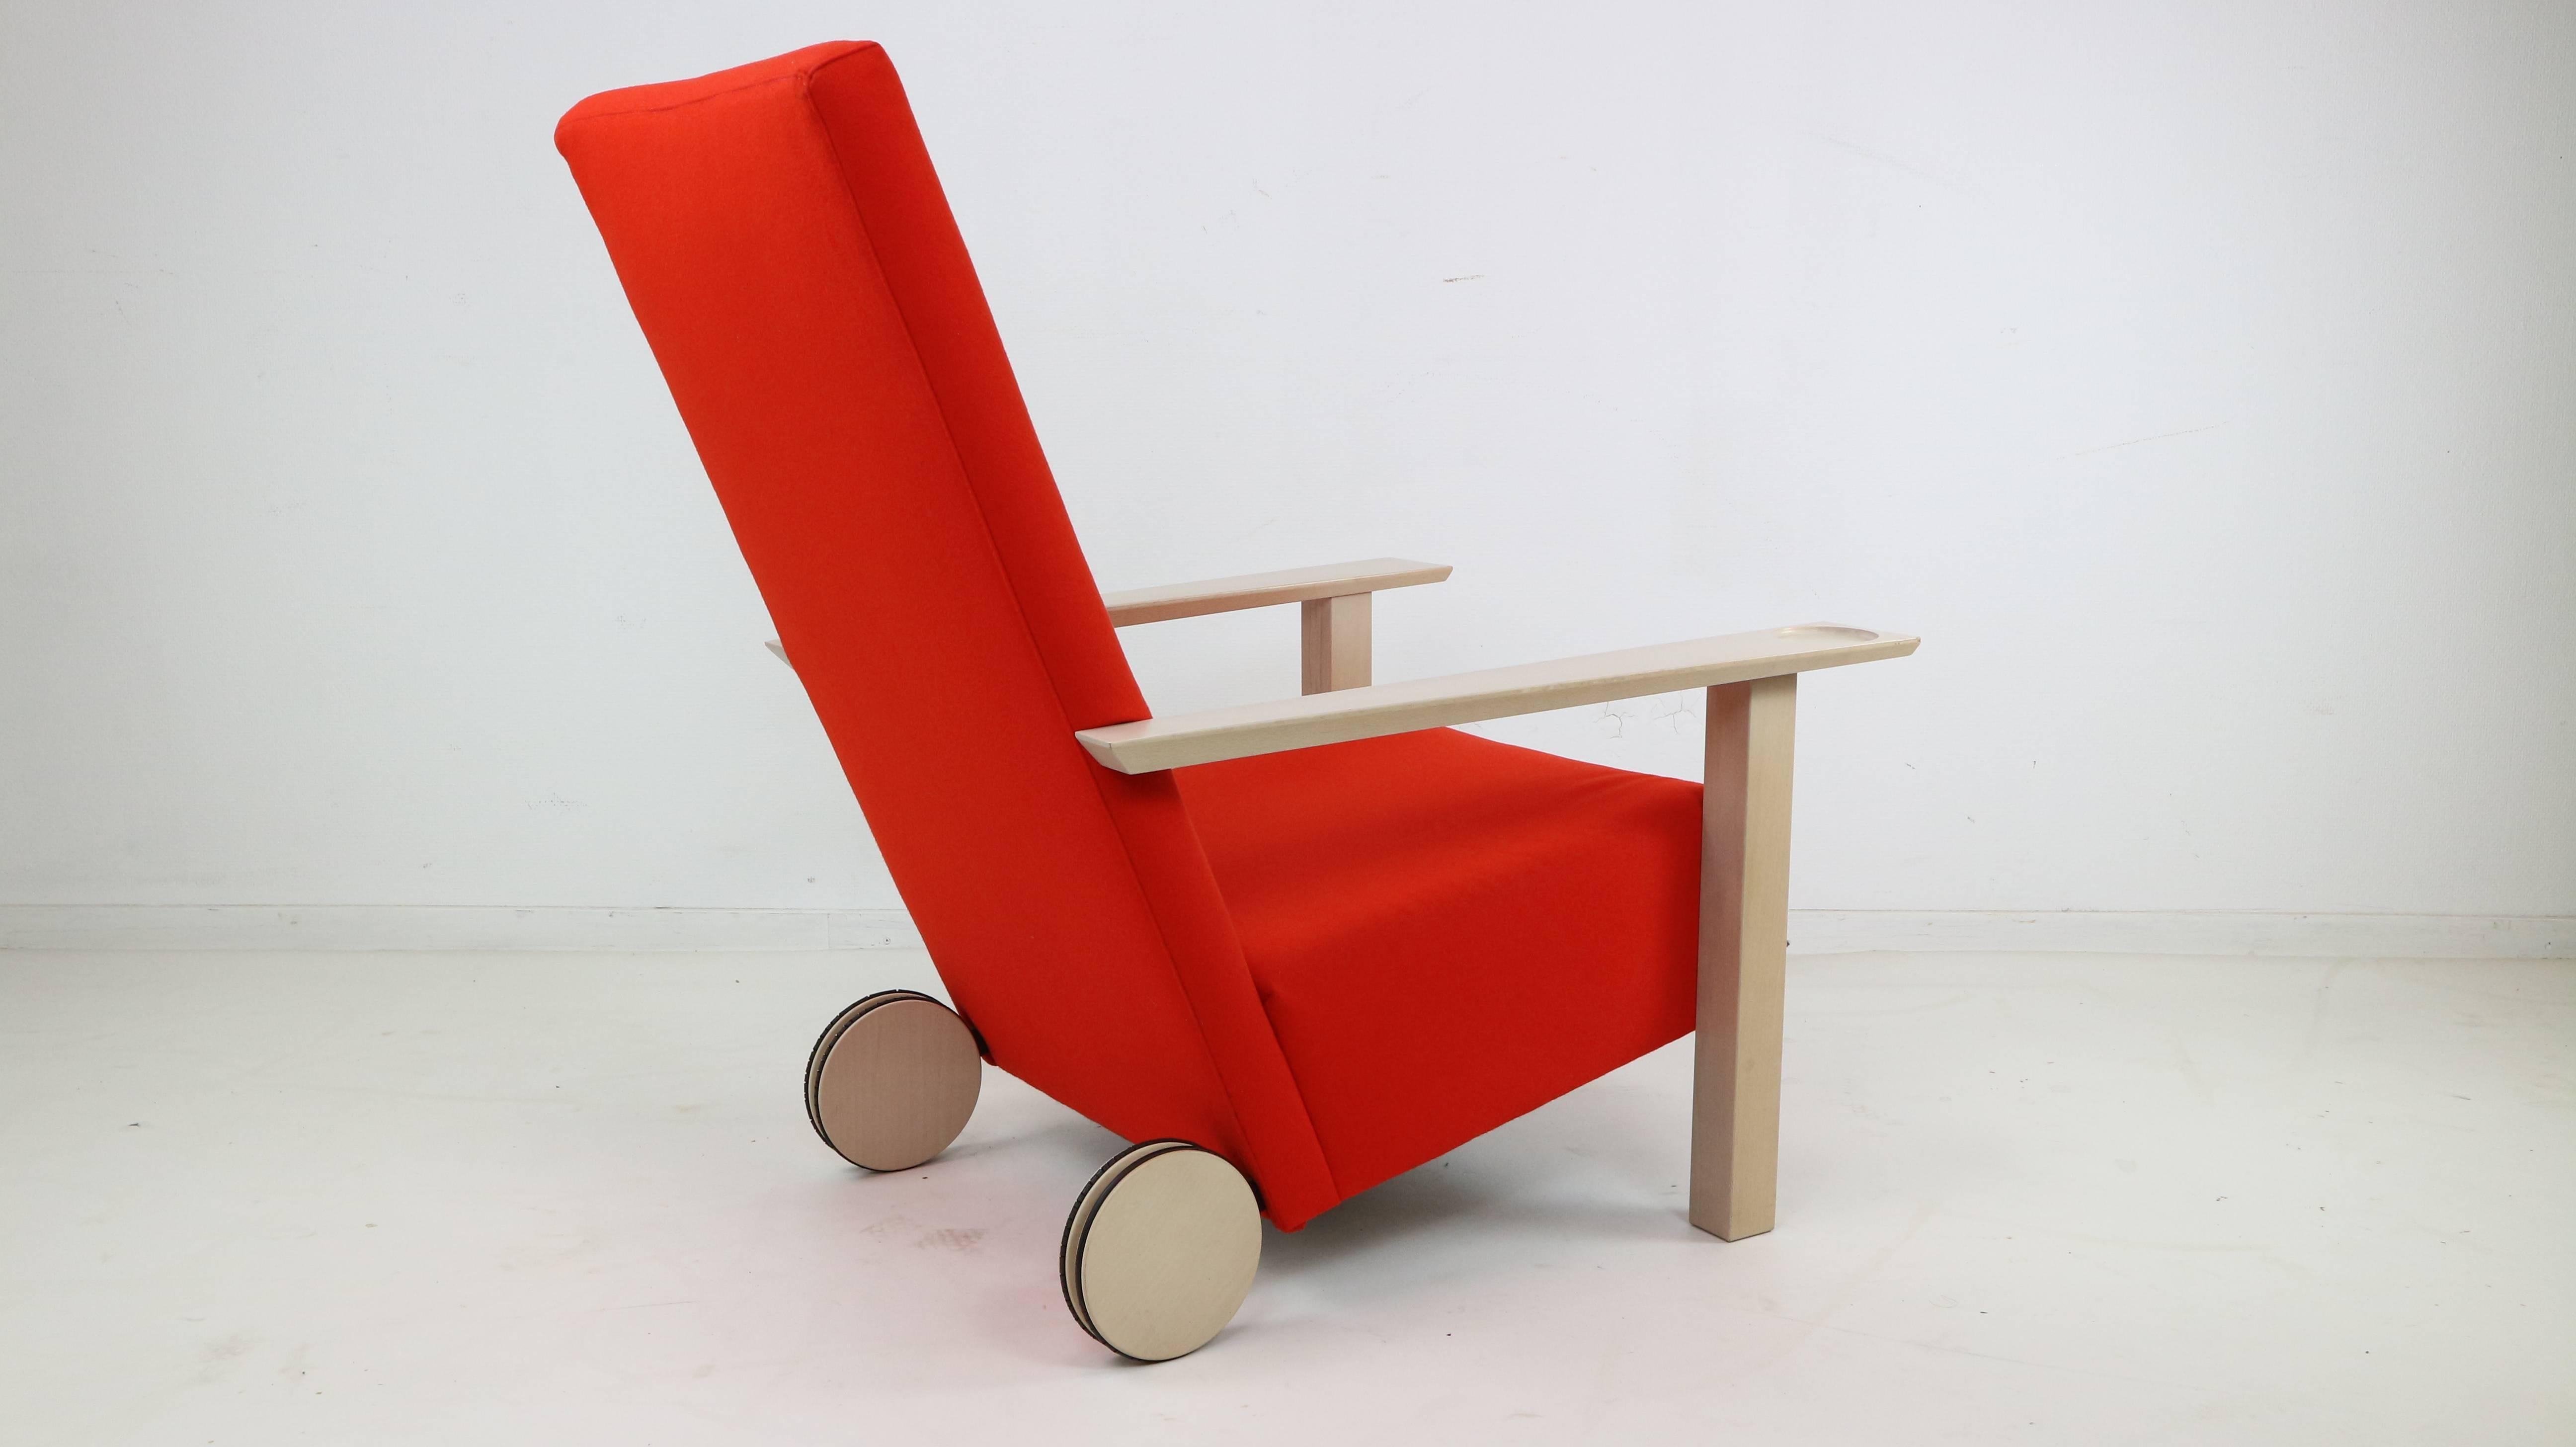 Burkhard Vogtherr, armchair model 'Small Room' for Cappellini. Designed 1995. Light wood construction, red wool fabric covers, equipped with two wheels. Slight traces of wear commensurate with age, the rubber coating of the wheels is partially